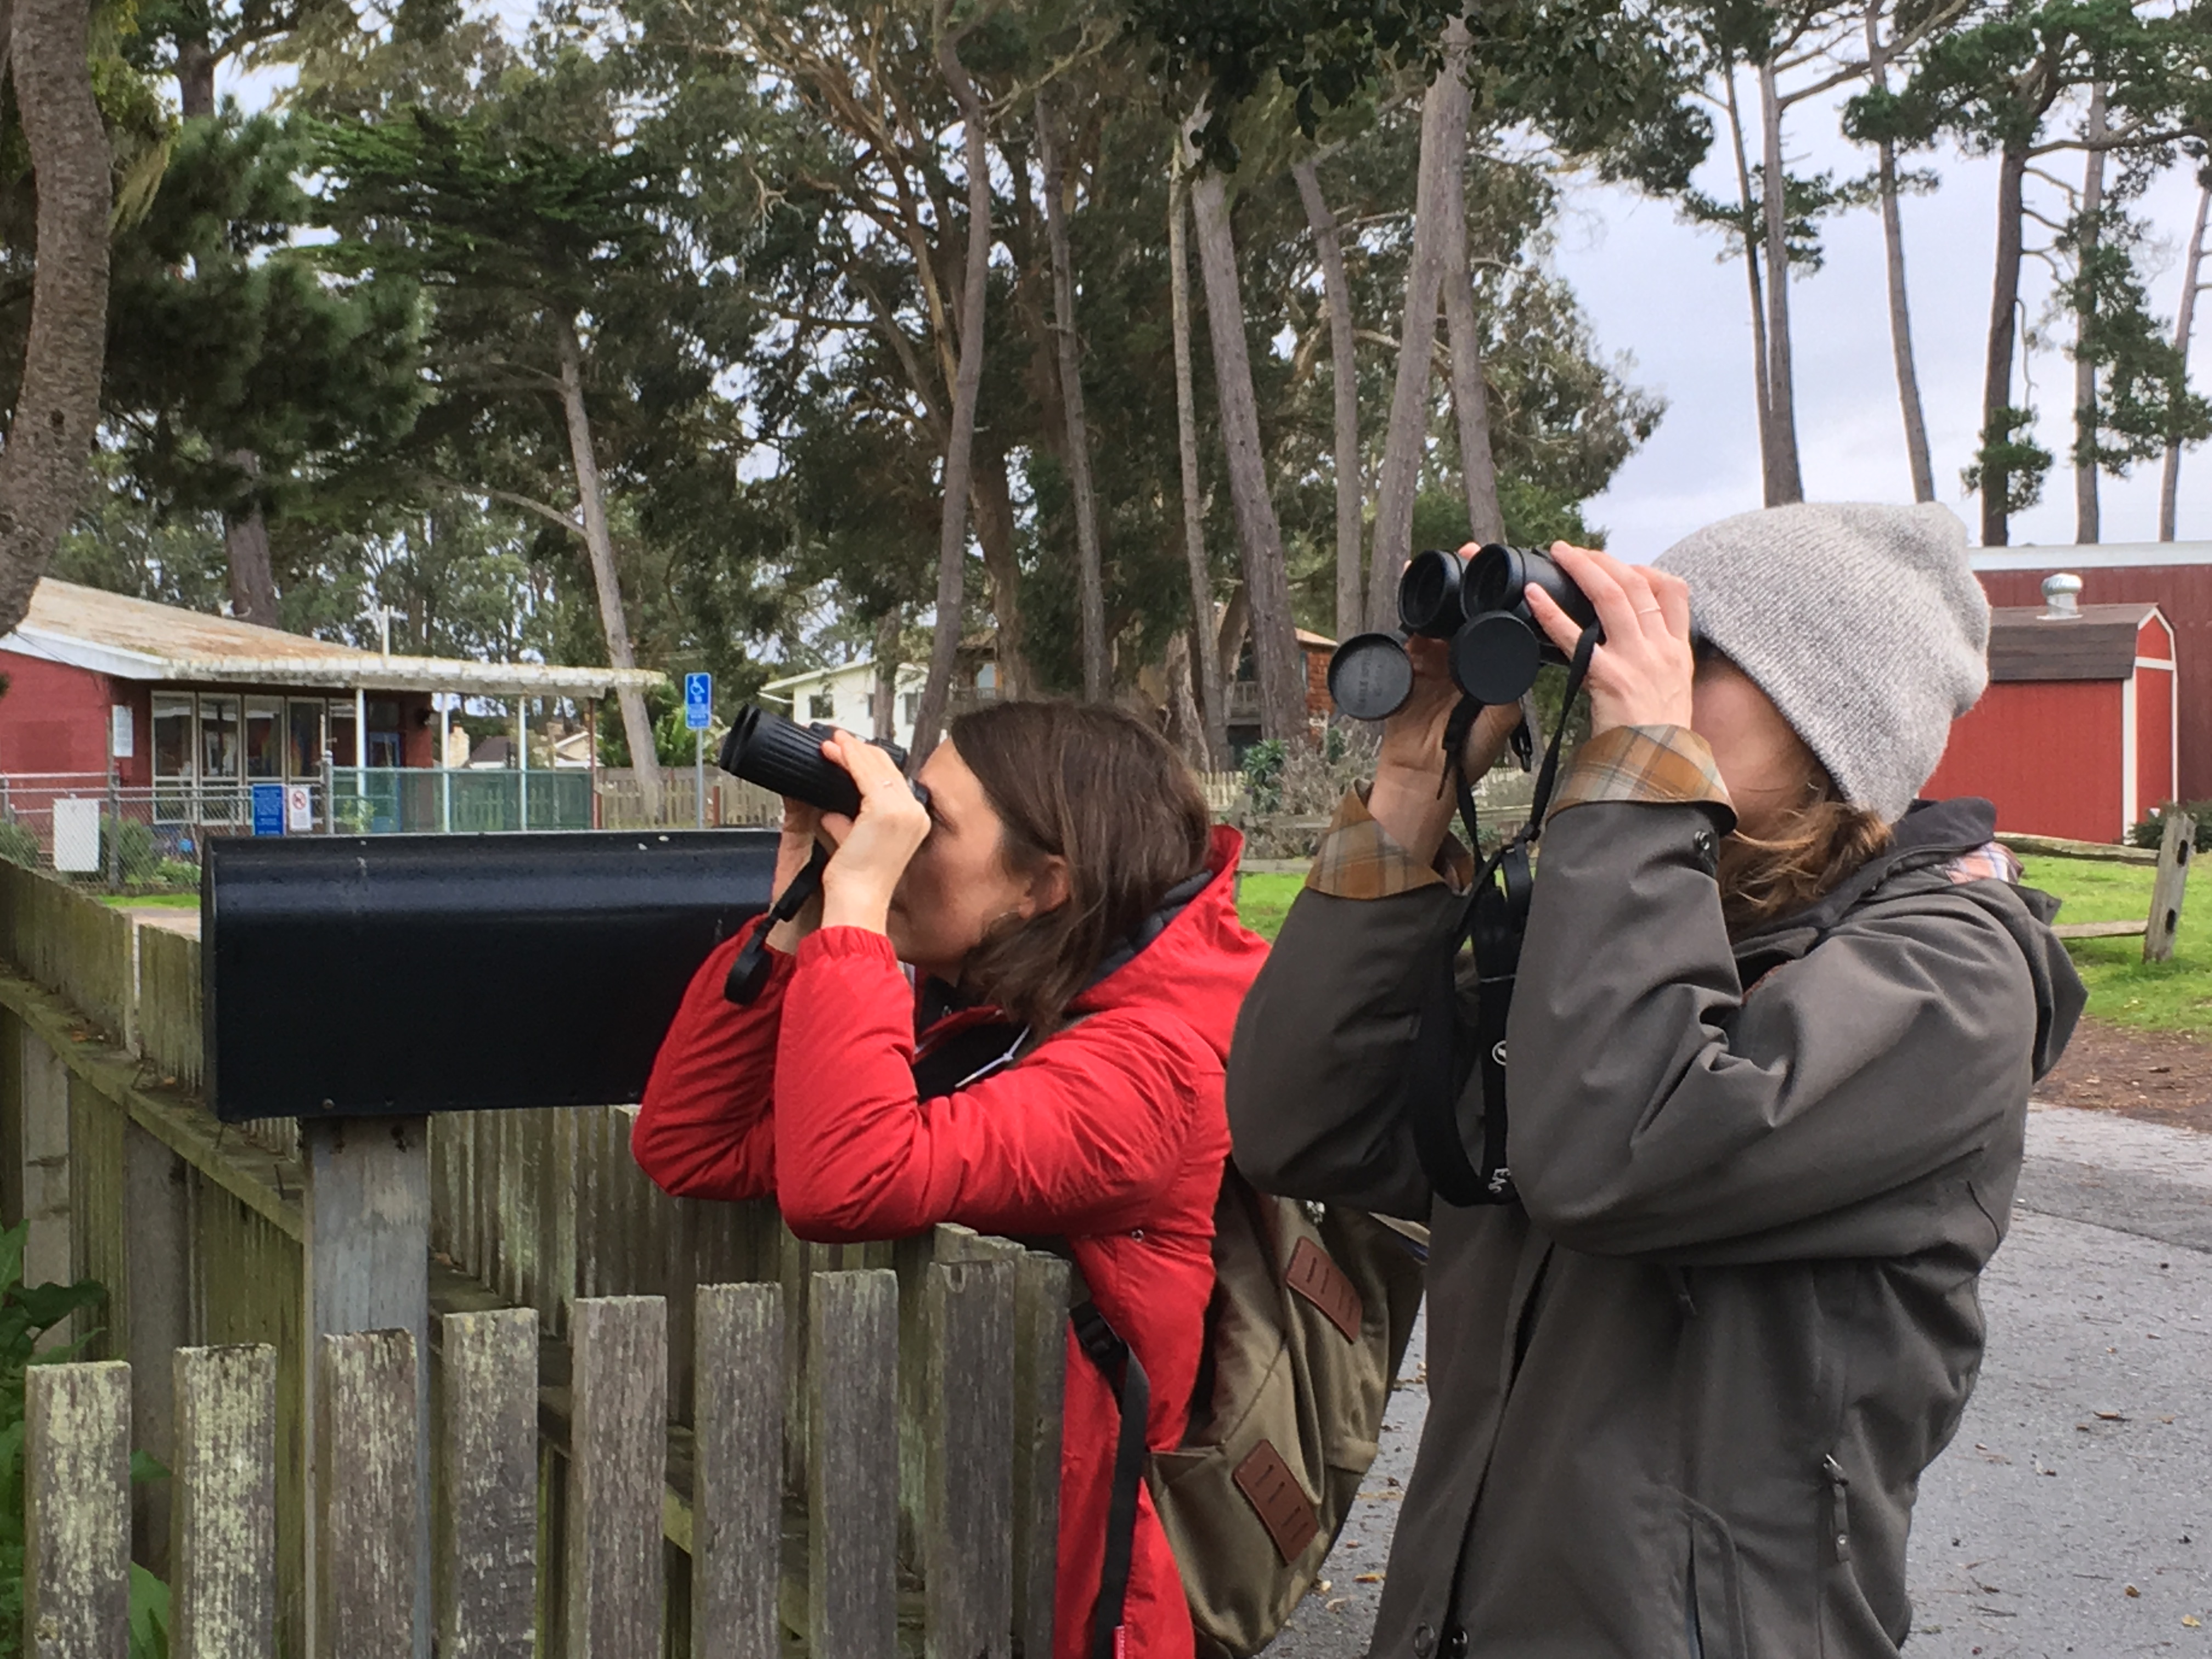 Two women in coats and knit hats lean on a wooden fence and look upwards, in the distance, with binoculars. Though what they are looking at is not shown in the frame, they are participating in a monarch observation project.